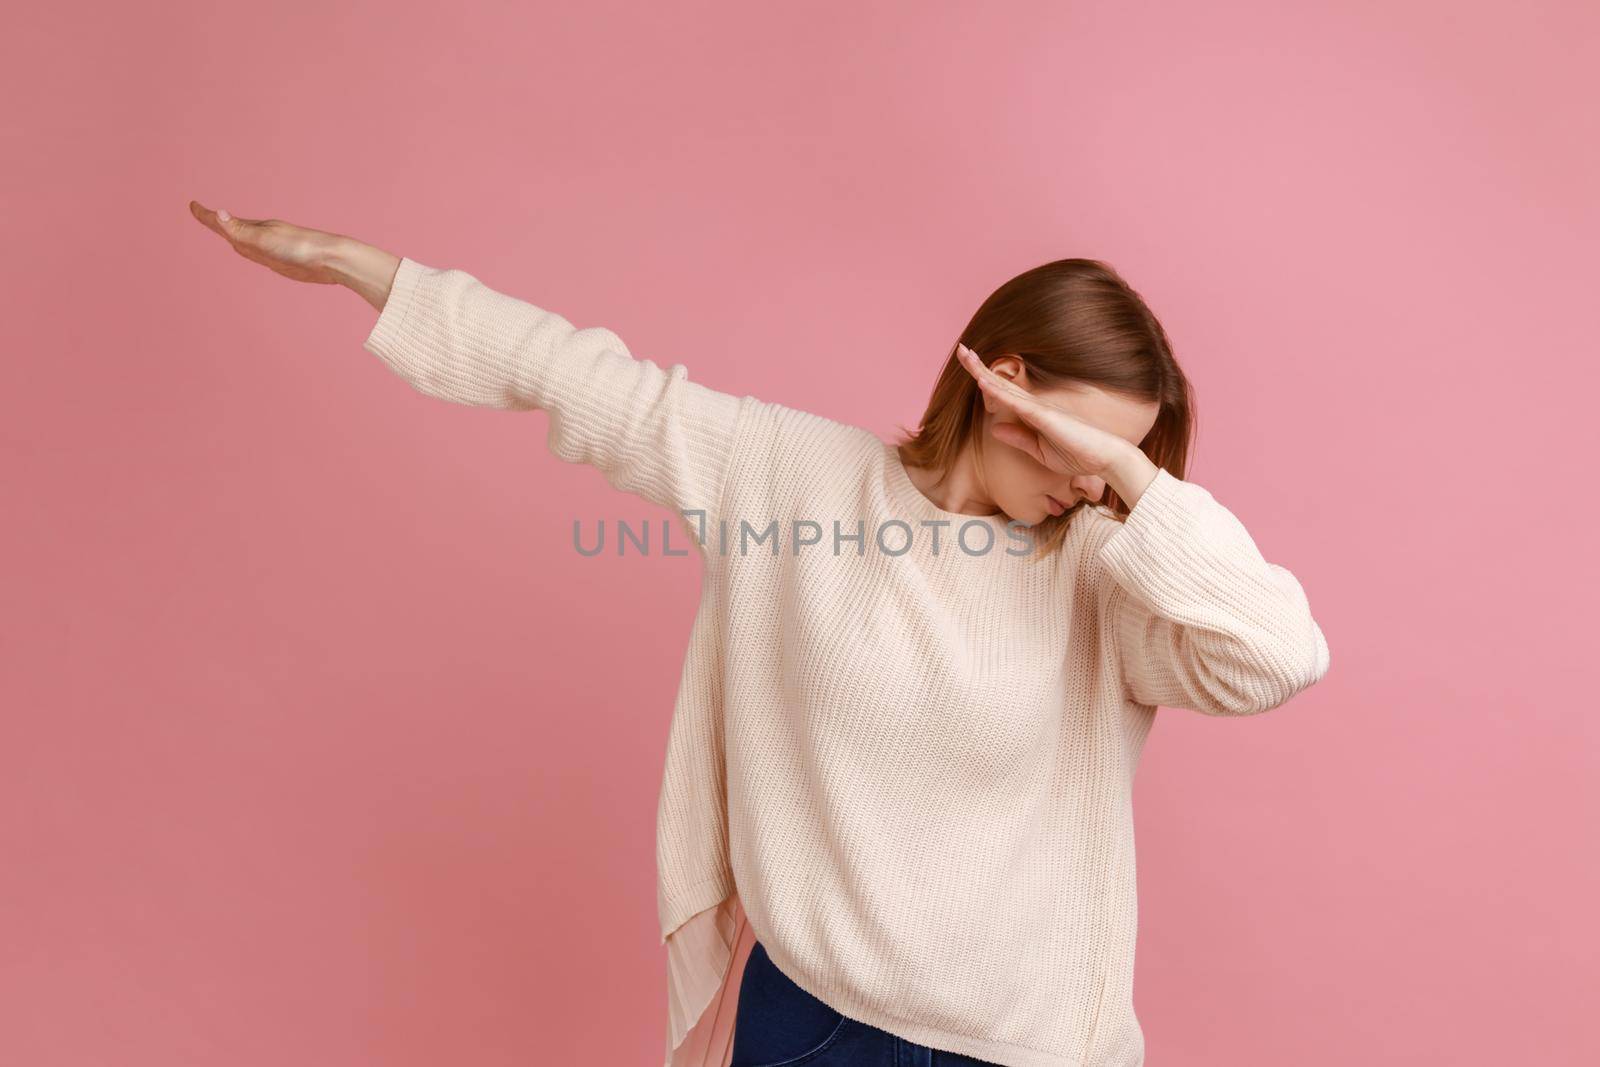 Portrait of blond woman showing dab dance pose, famous internet meme of triumph, performing dabbing trends with hand gesture, wearing white sweater. Indoor studio shot isolated on pink background.